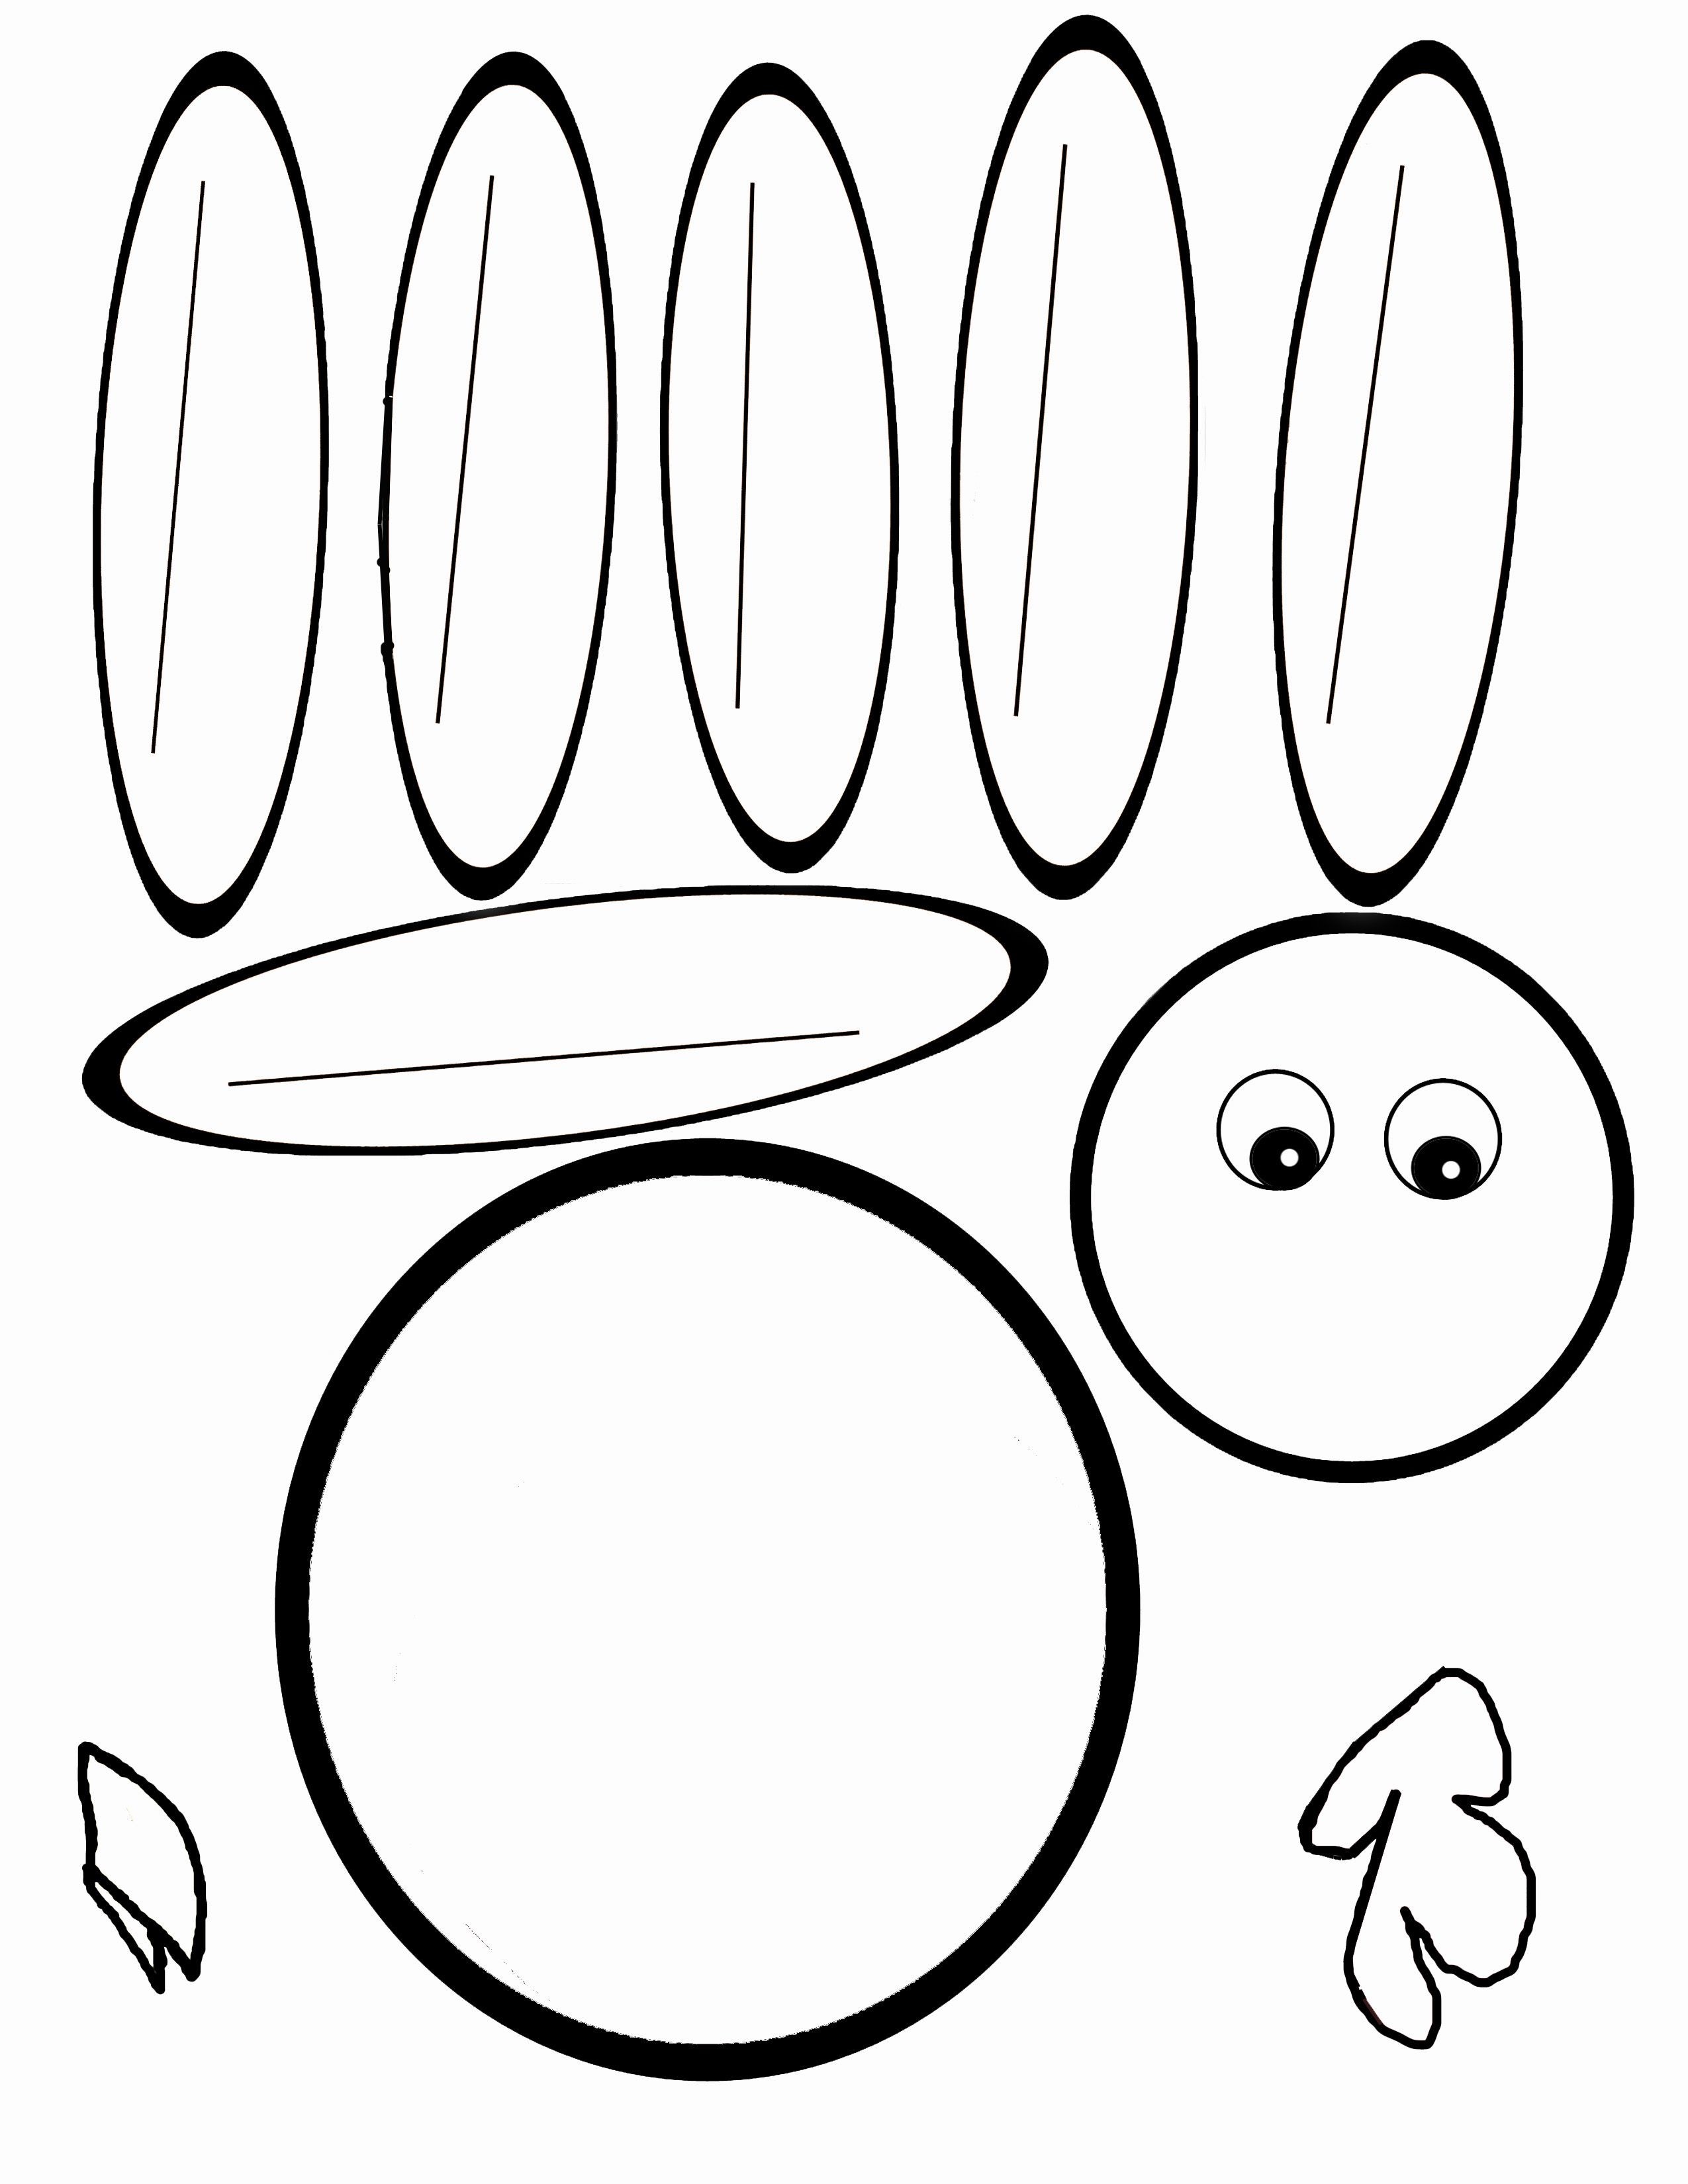 Turkey Templates Printable Here Is The Pdf For Blank Template